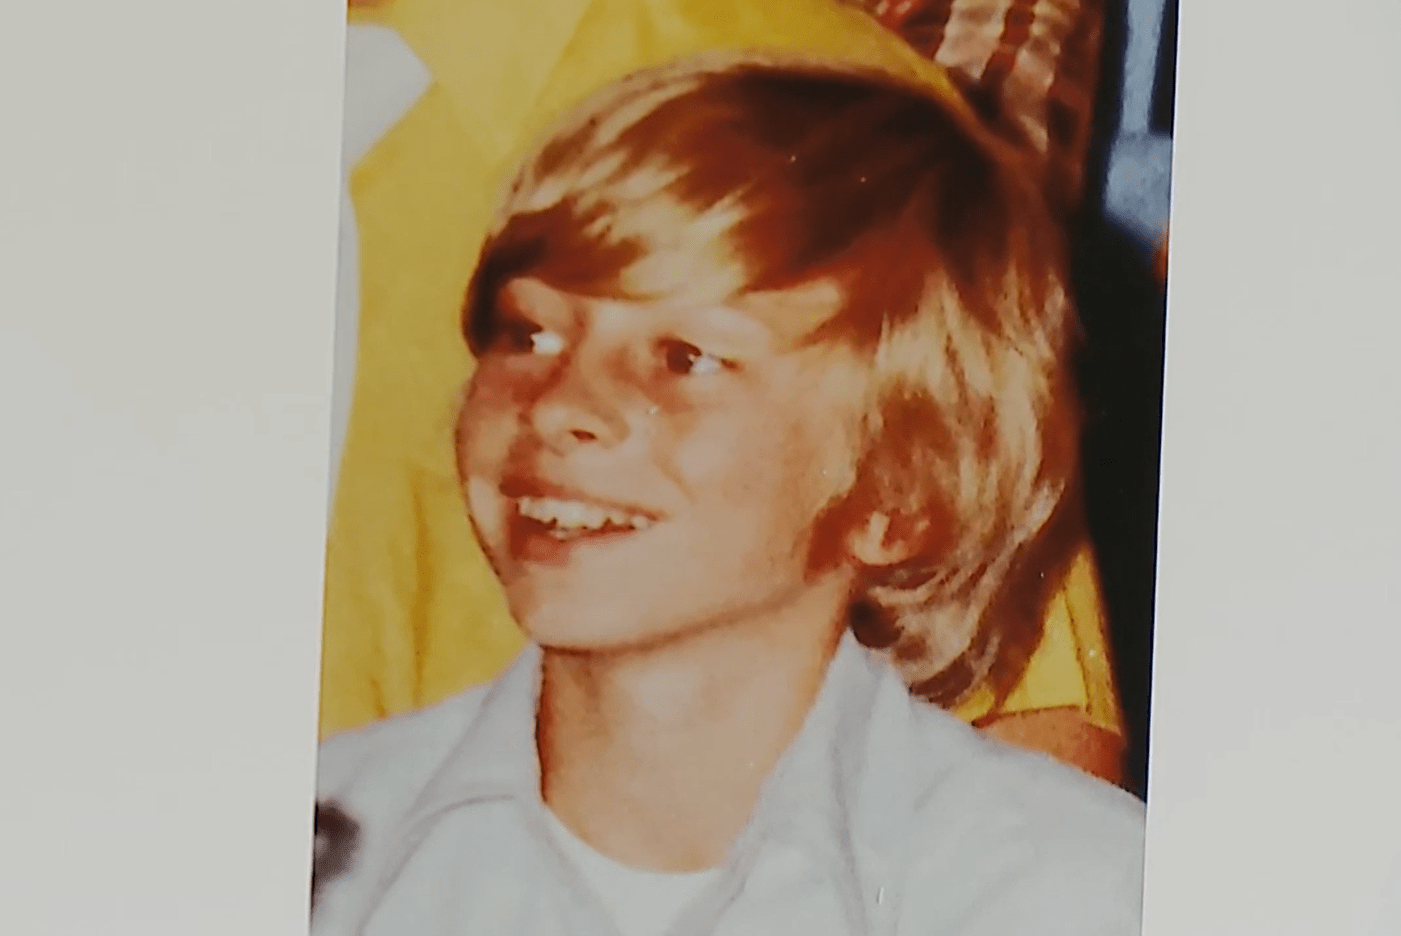 The Boardman Police Department will host a press conference this afternoon to give an update on a 1975 death investigation of a 13-year-old boy.